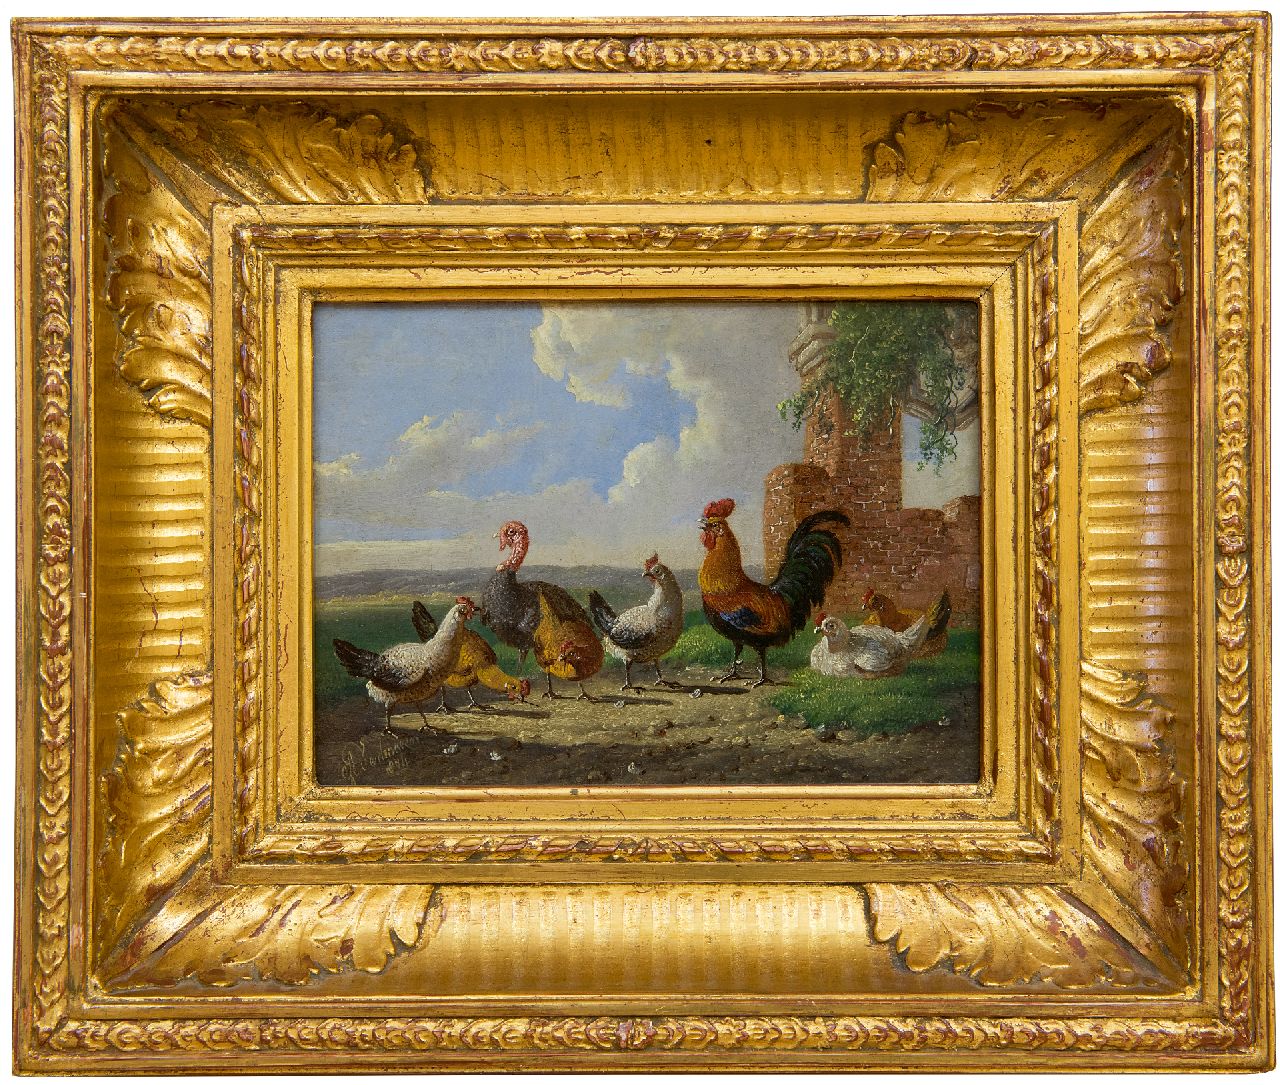 Verhoesen A.  | Albertus Verhoesen, A turkey, a cock and some chicken in a landscape, oil on panel 13.0 x 17.6 cm, signed l.l. and dated 1874